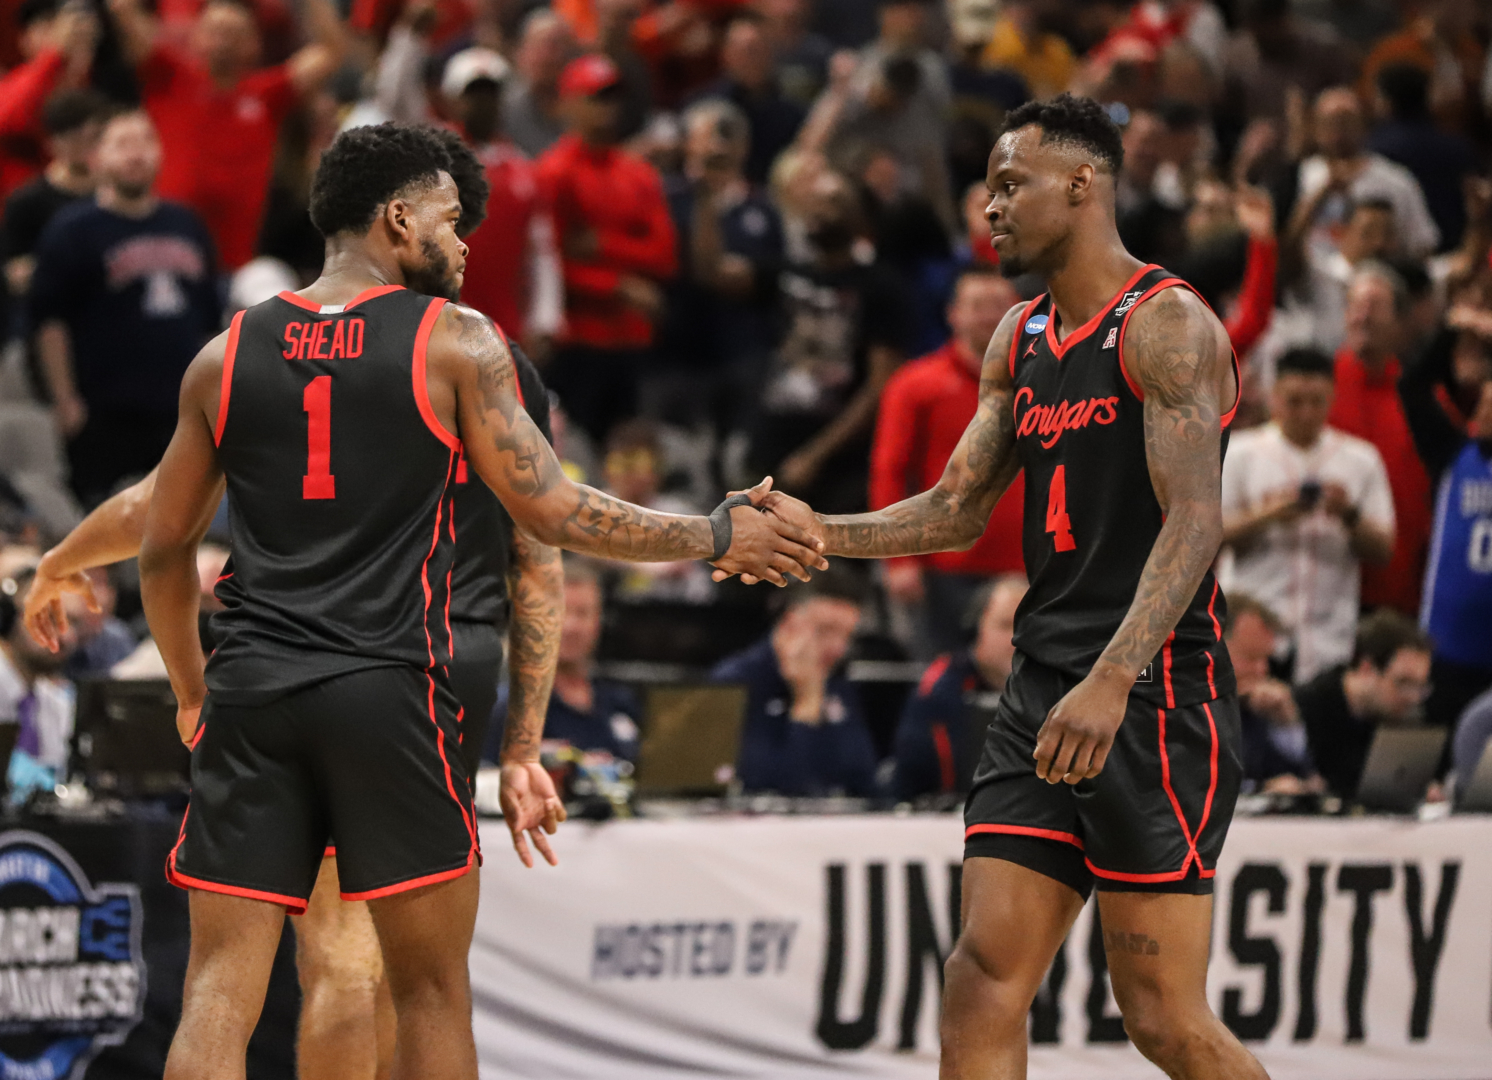 Taze Moore found a way to get himself involved in UH's Sweet 16 win over Arizona on Thursday despite spending the majority of the game on the bench. | Sean Thomas/The Cougar